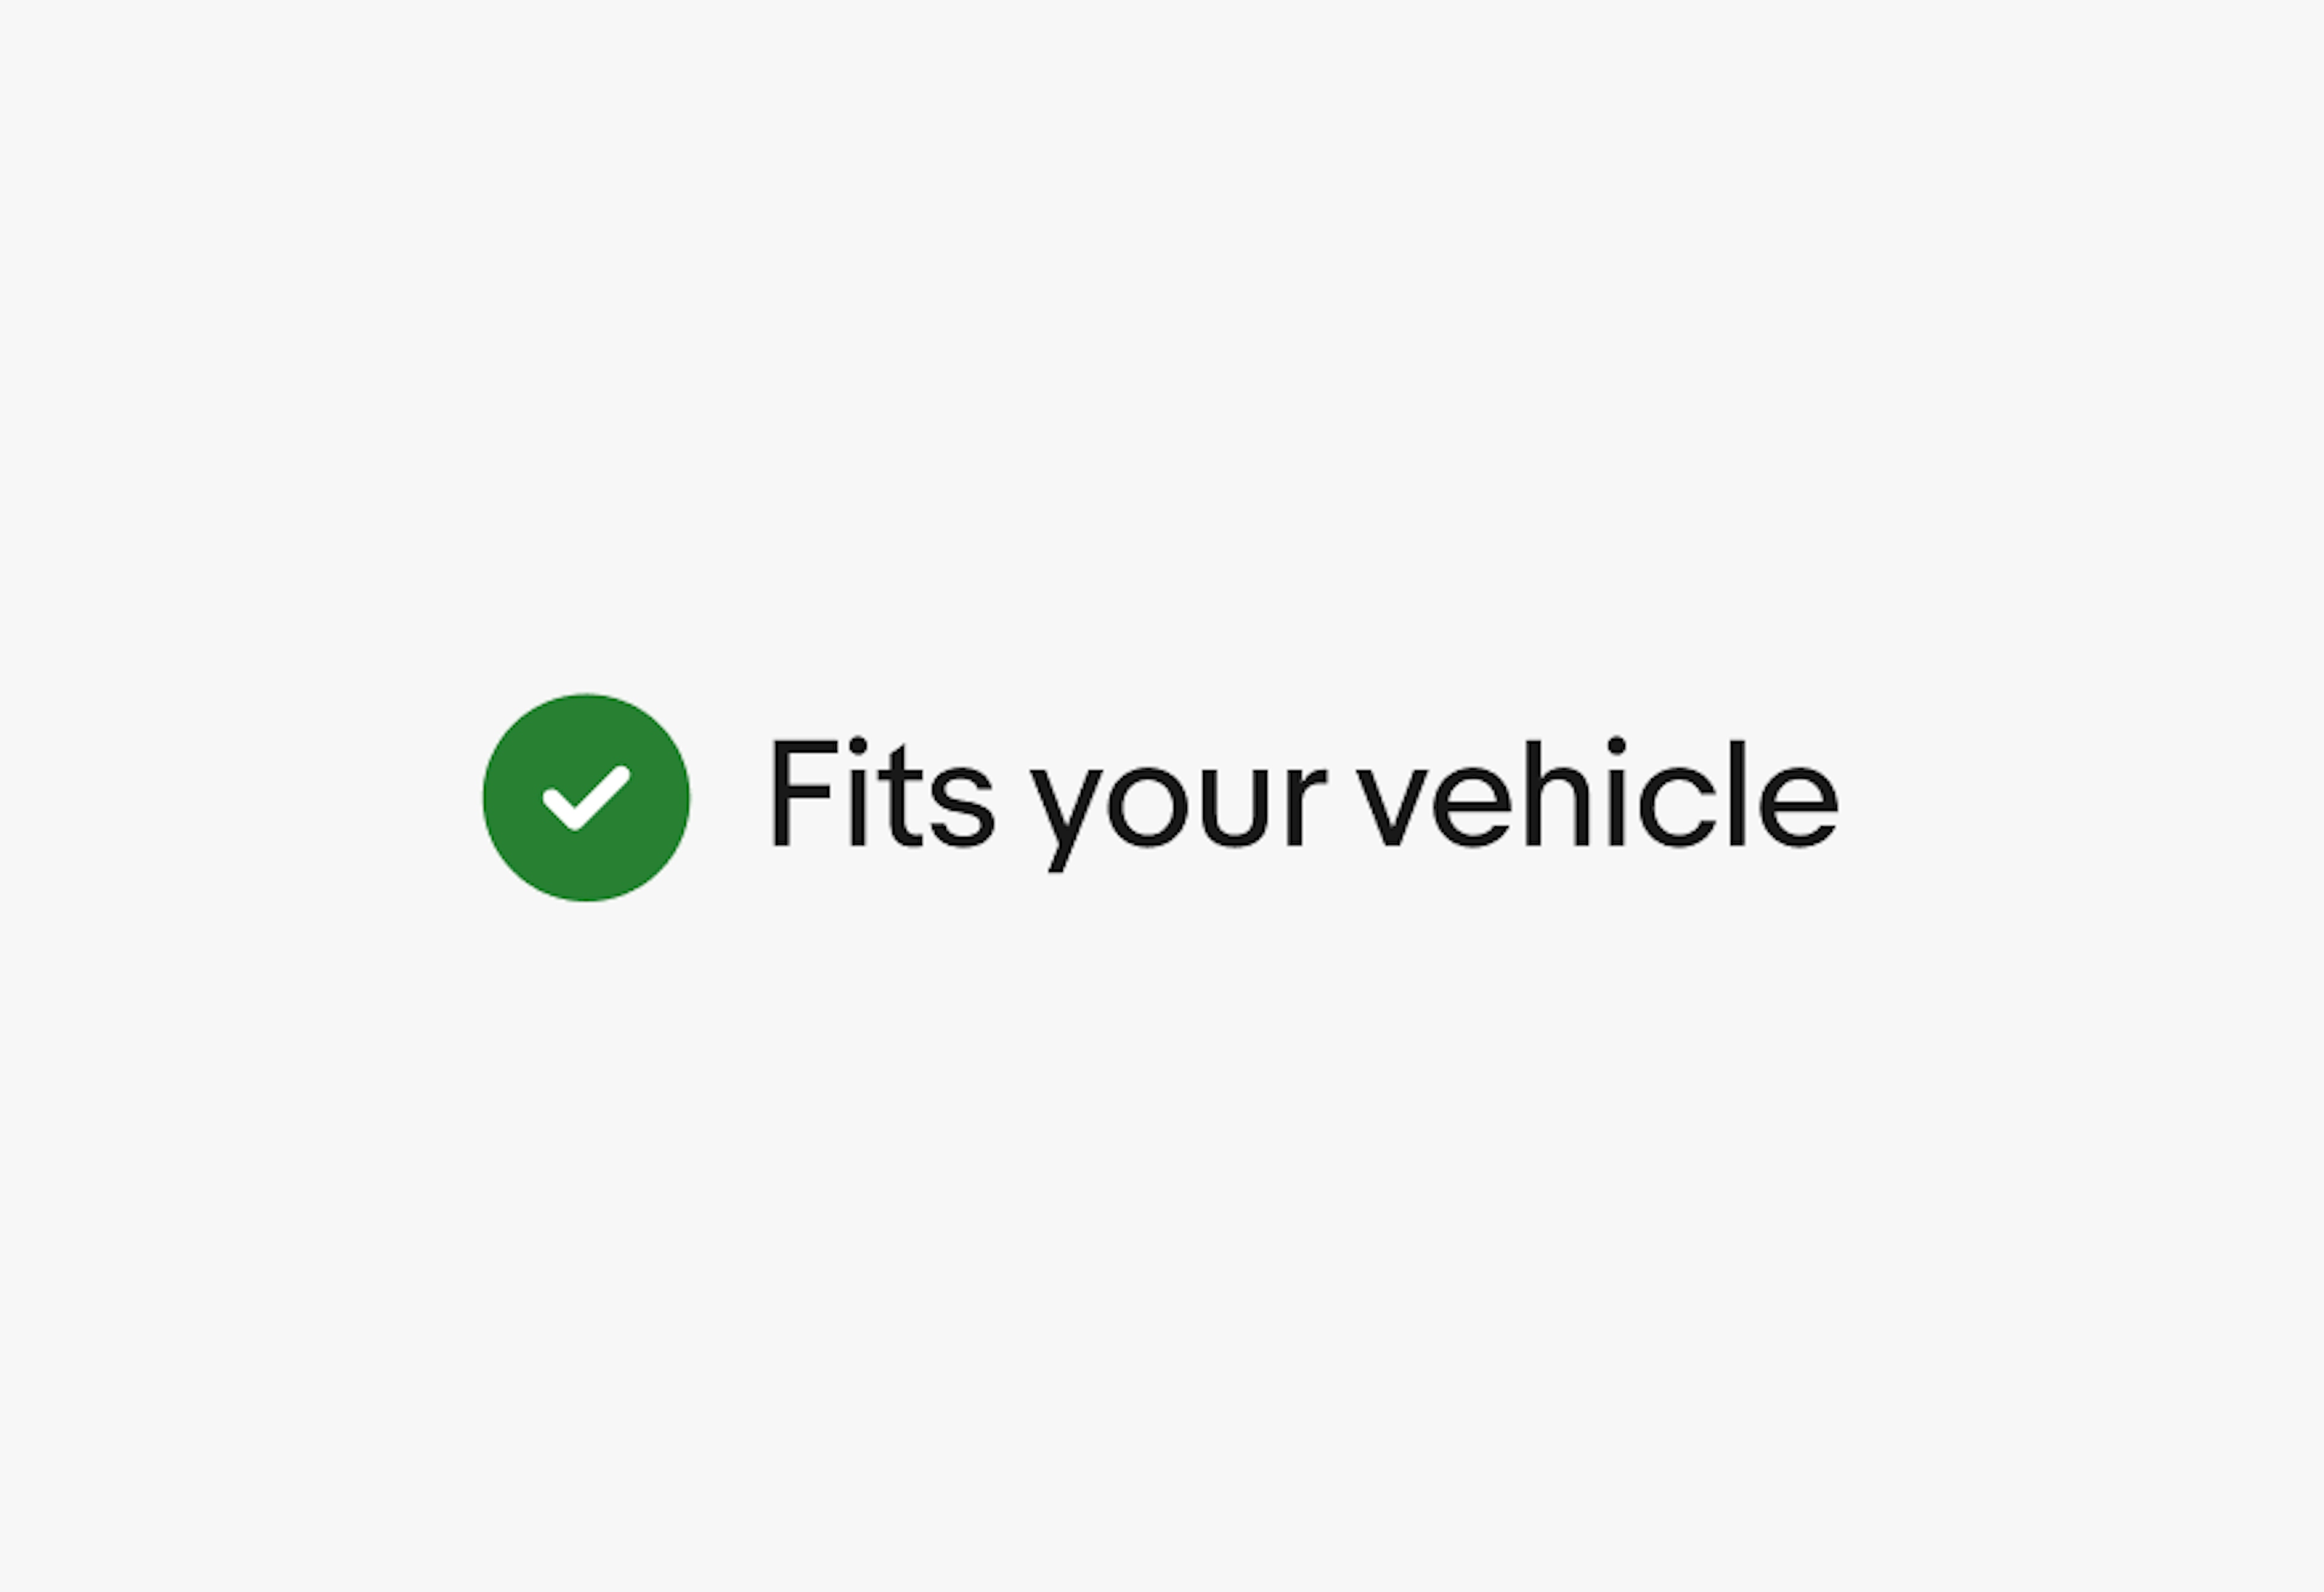 A green filled confirmation checkmark icon next to the text “Fits your vehicle”.